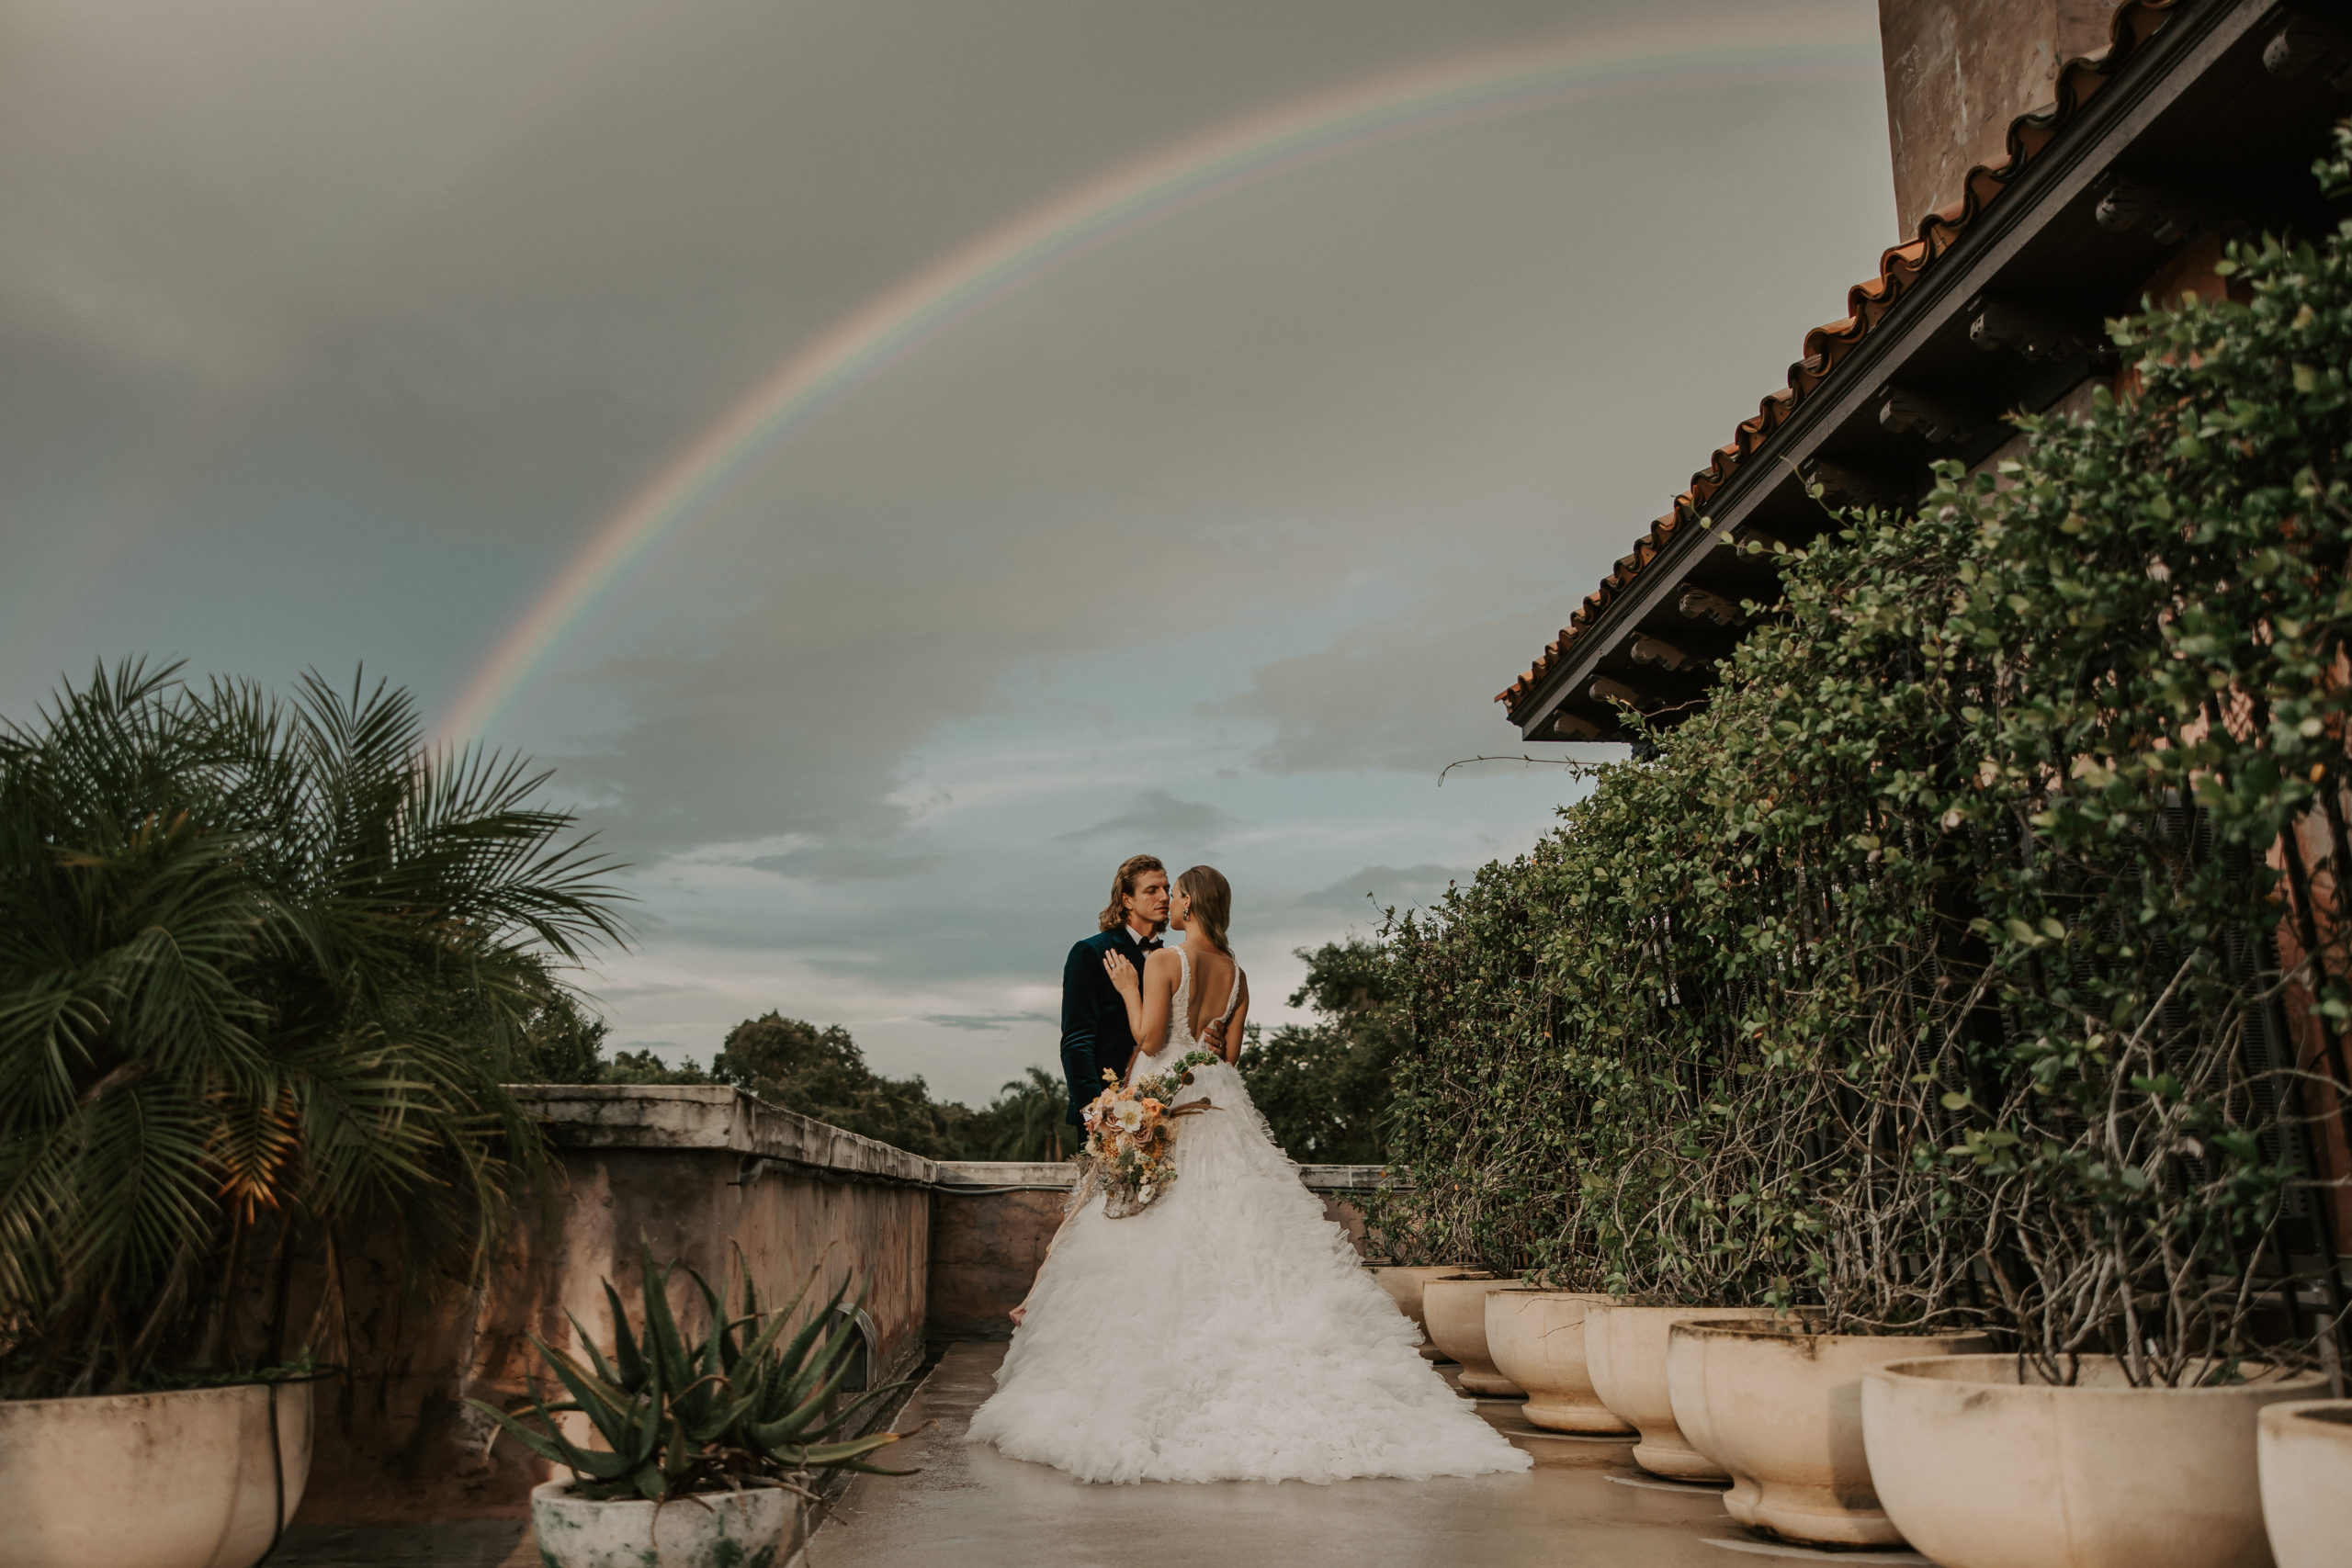 Summing up we were able to end our shoot capturing an epic rainbow on the rooftop of the mansion! We couldn’t have asked for a better ending!